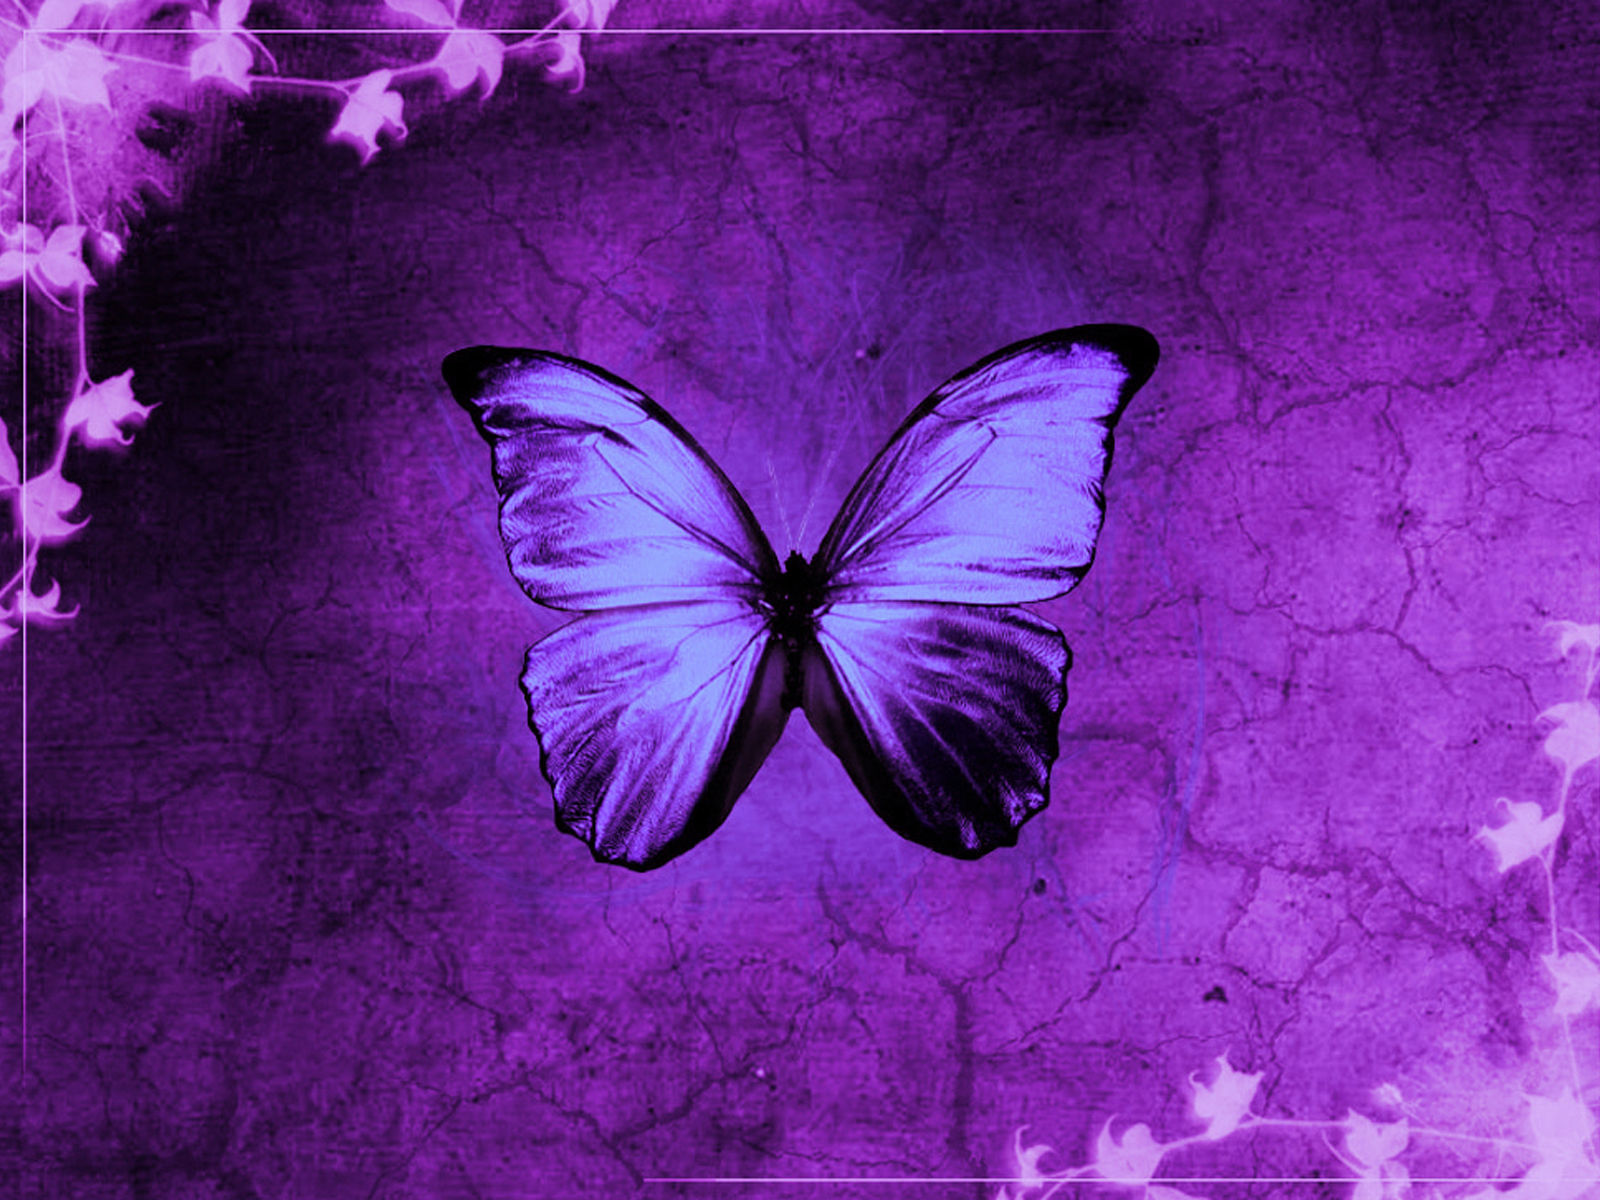 Vista msn butterfly grass Powerpoint Templates - Beauty & Fashion, Black,  Fuchsia / Magenta, White - Free PPT Backgrounds and Templates